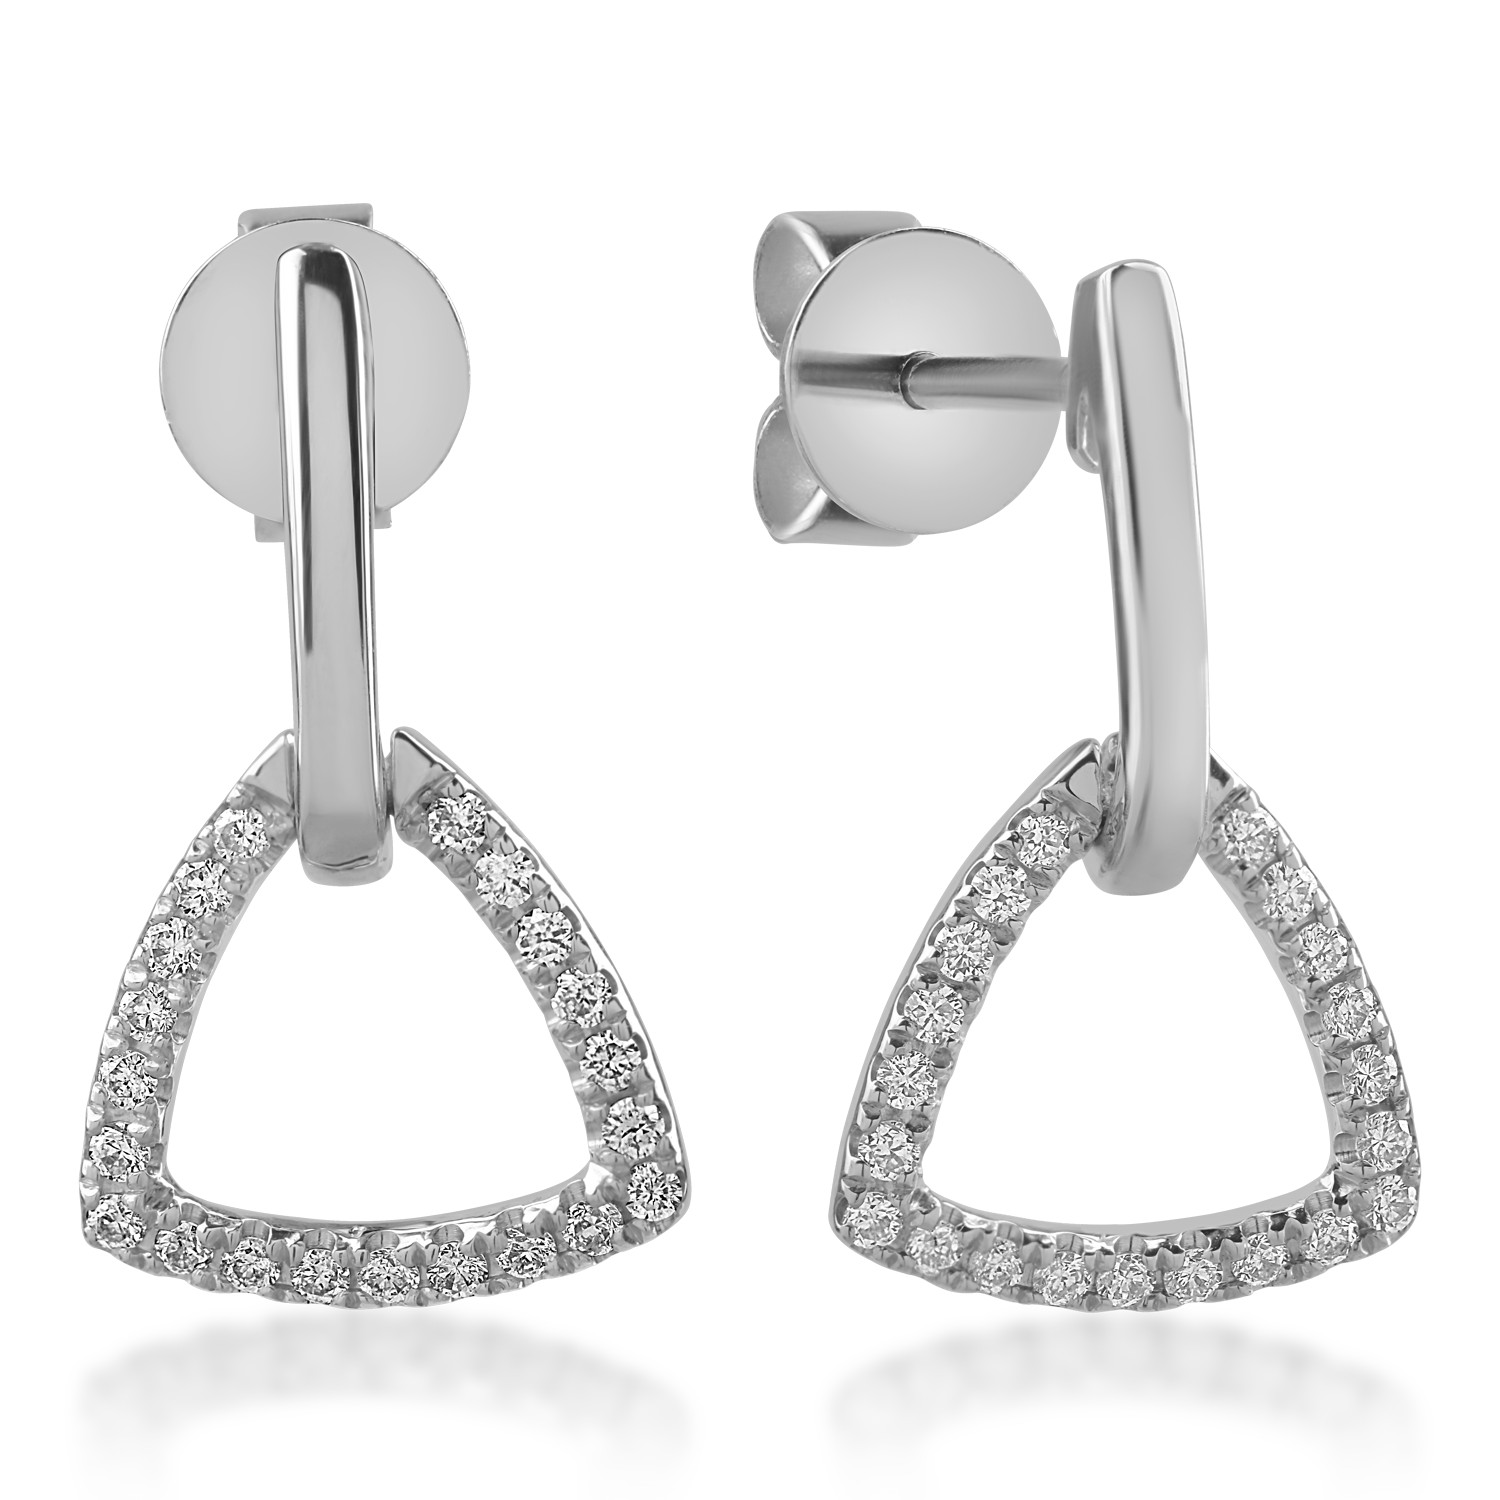 White gold earrings with 0.16ct diamonds